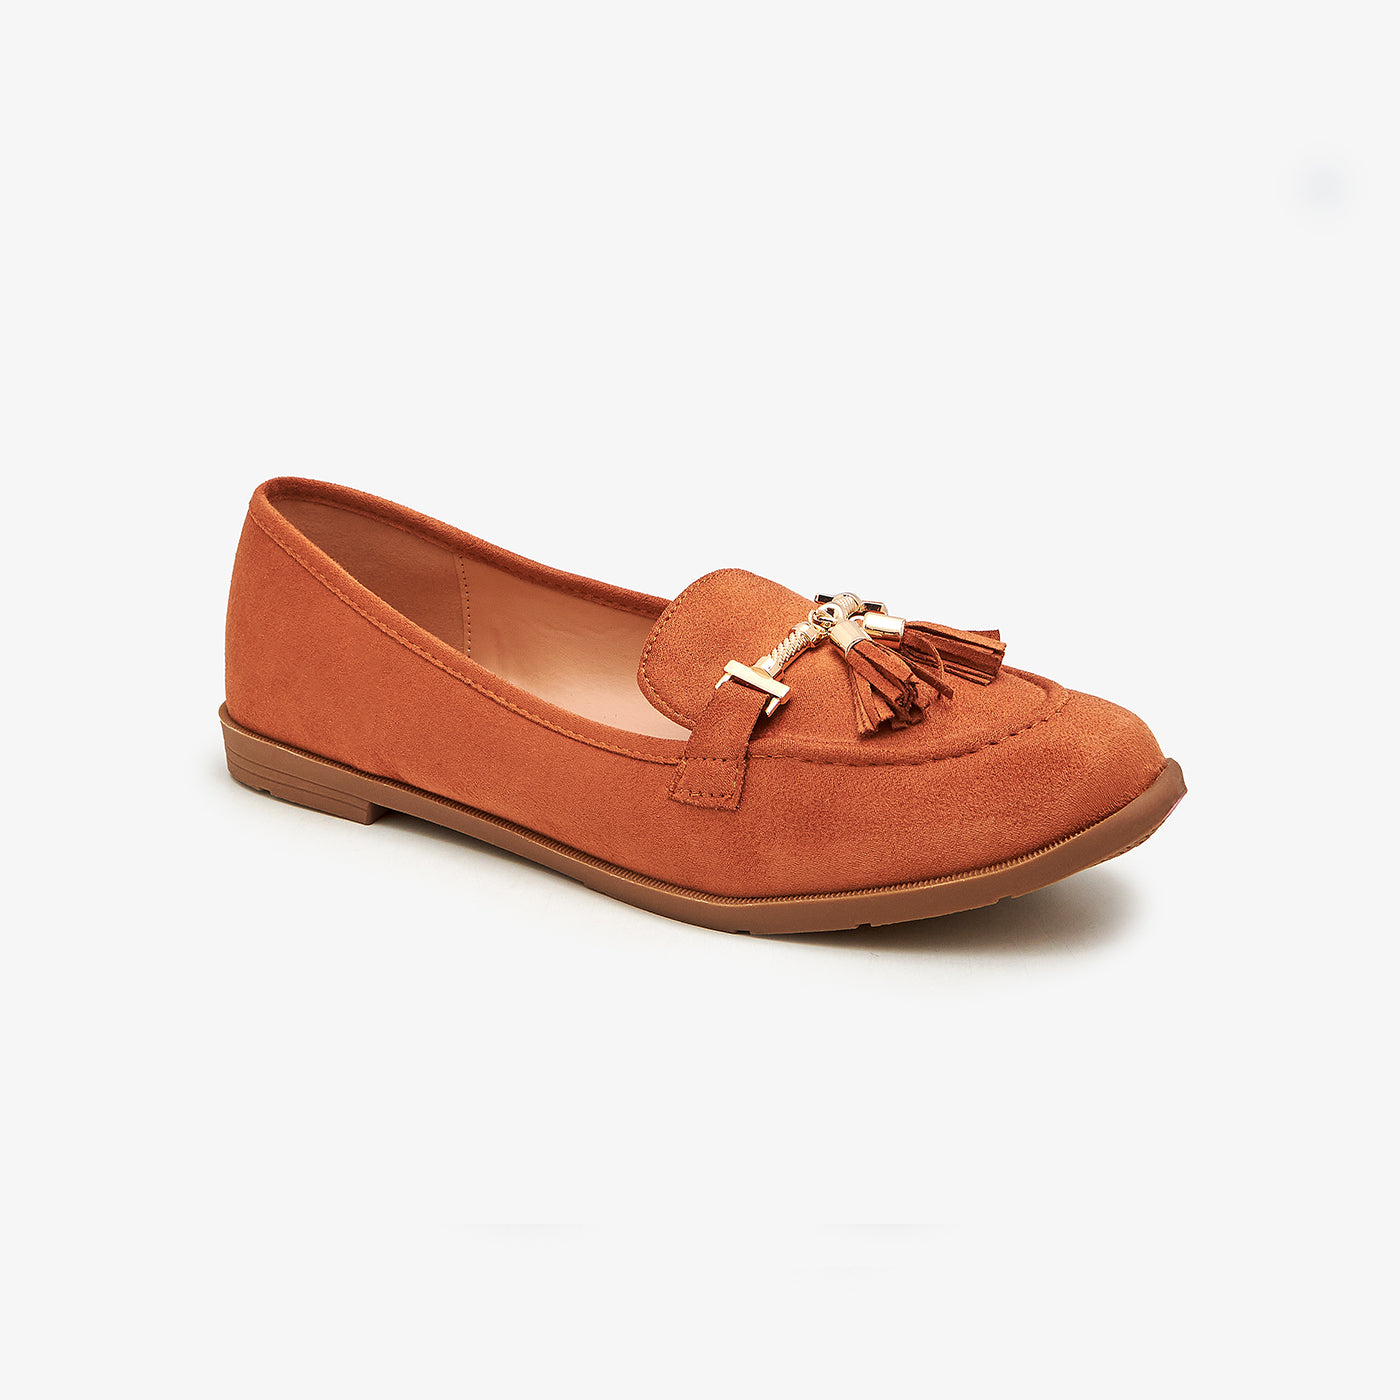 Women's Suede Loafers